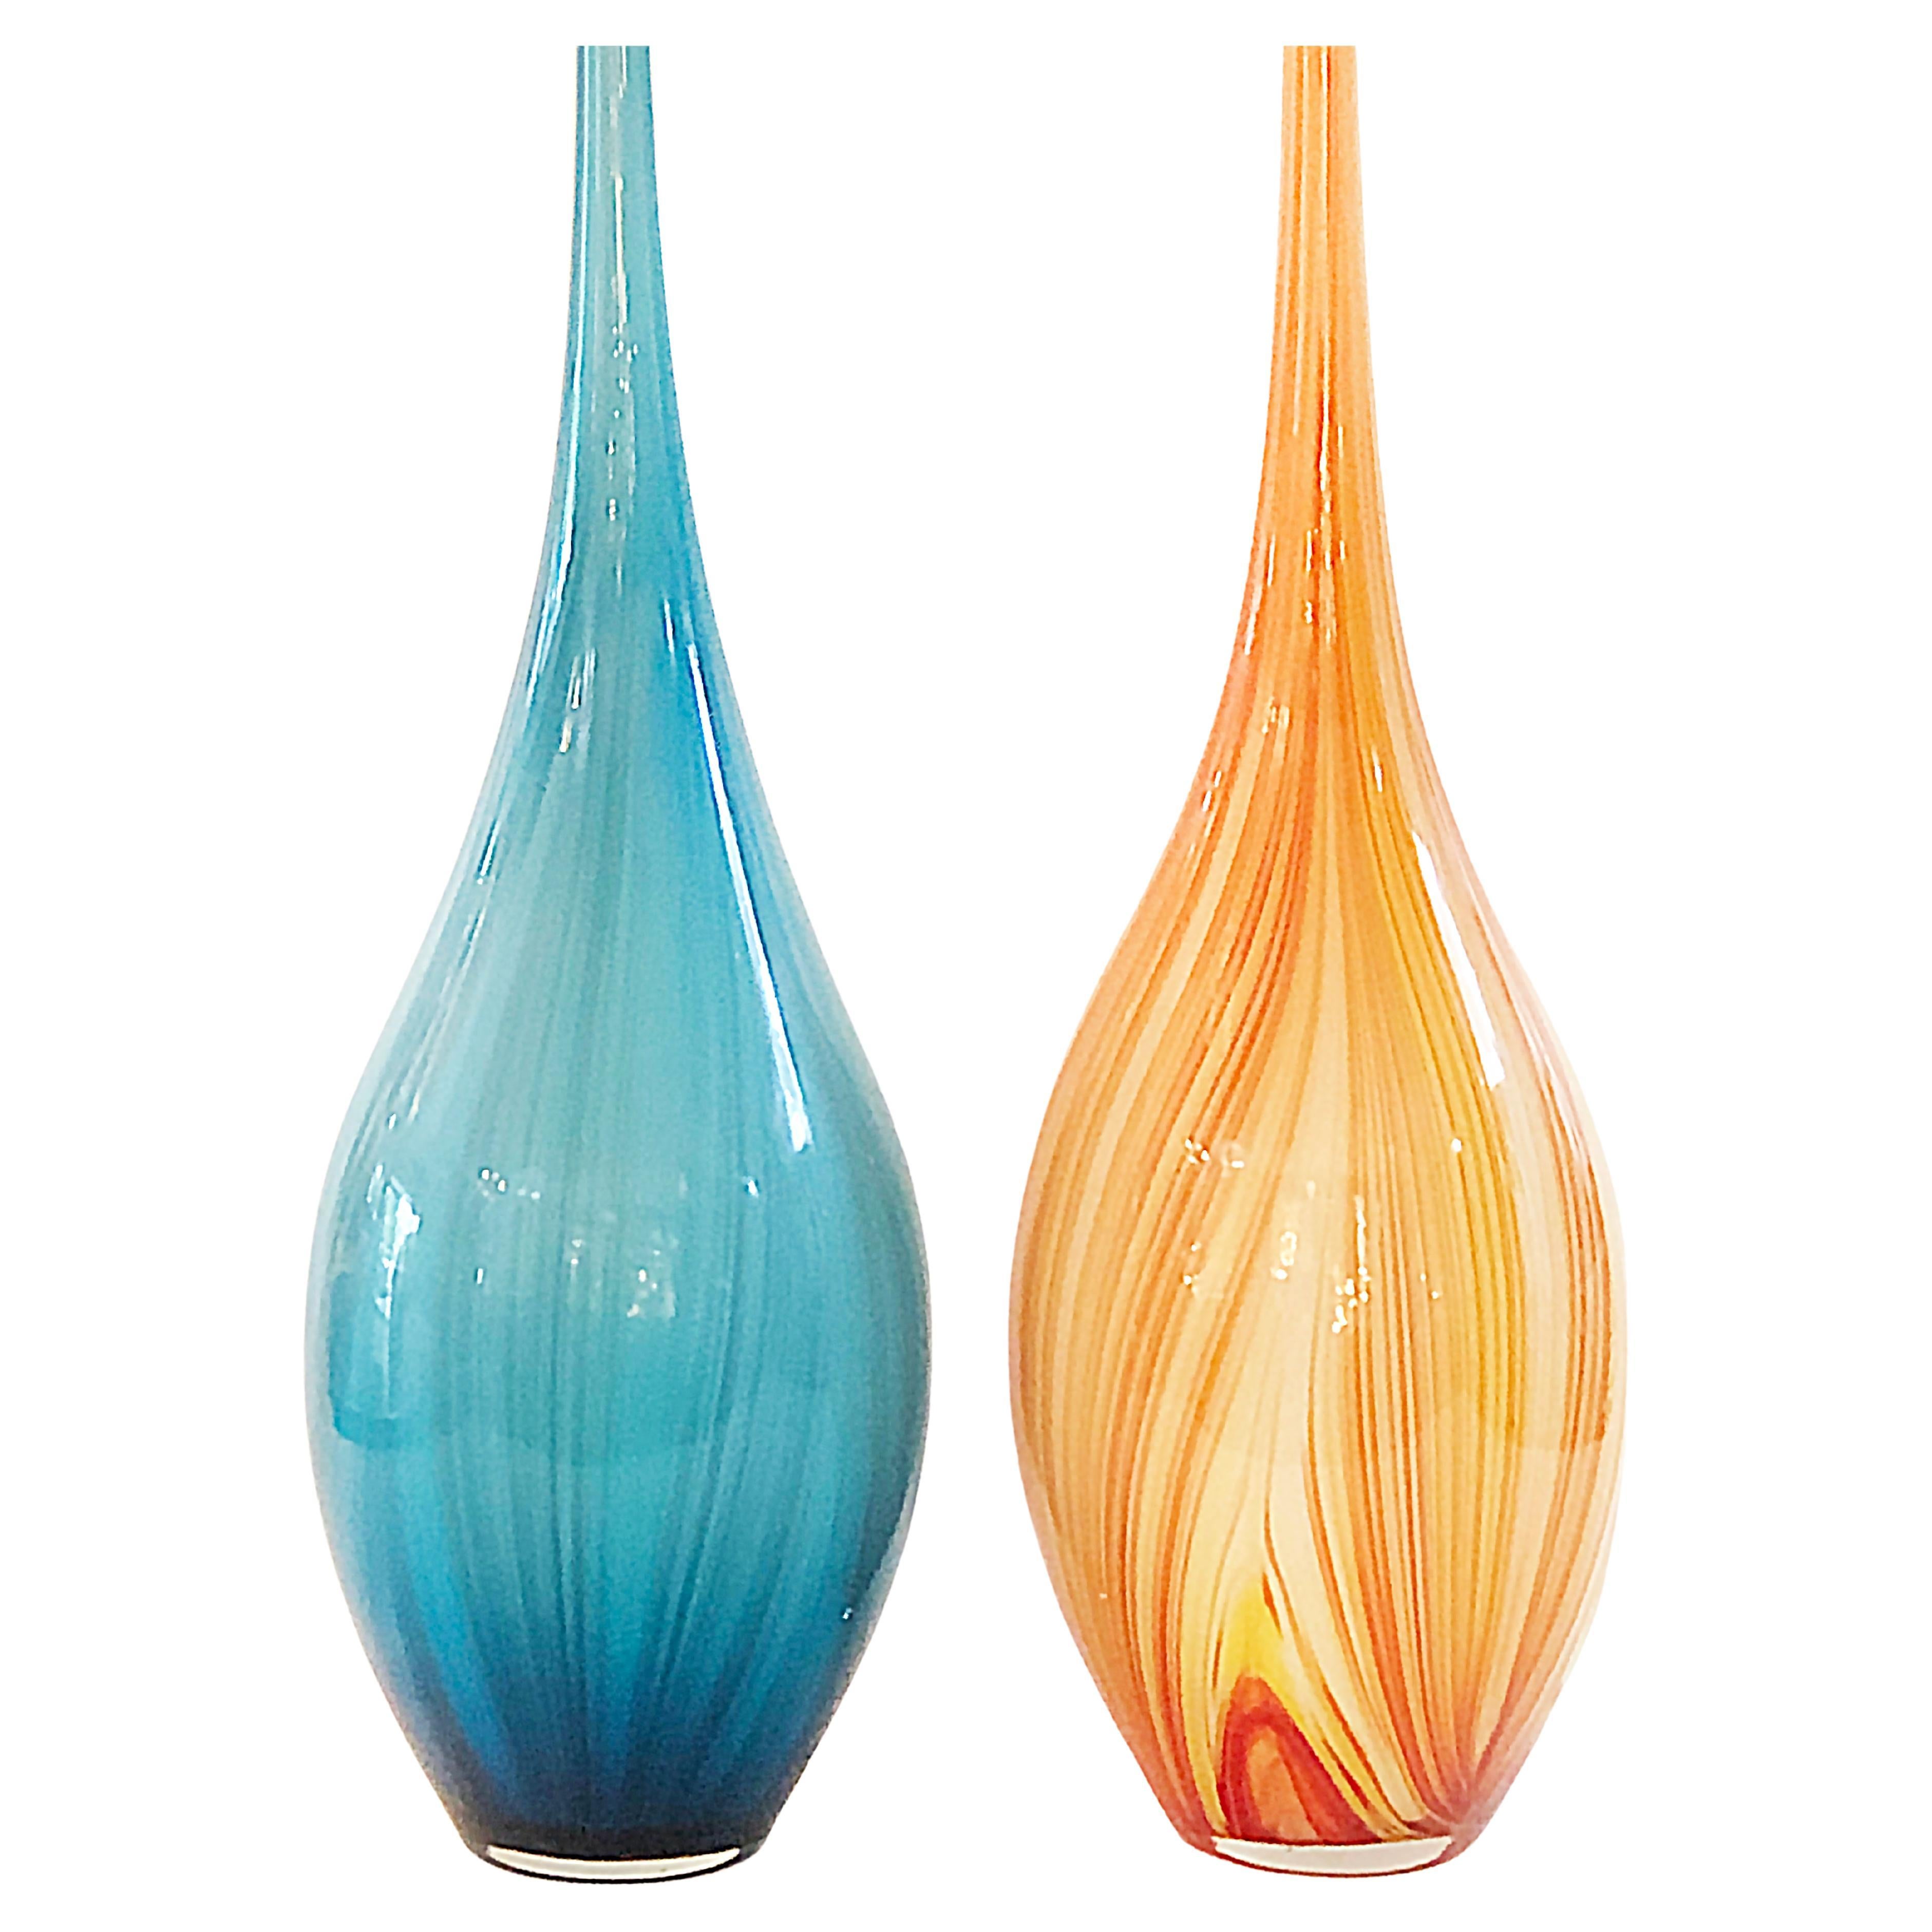 Vintage Elongated Tall Blown Glass Vases with Bulbous Bases in Blue and Amber